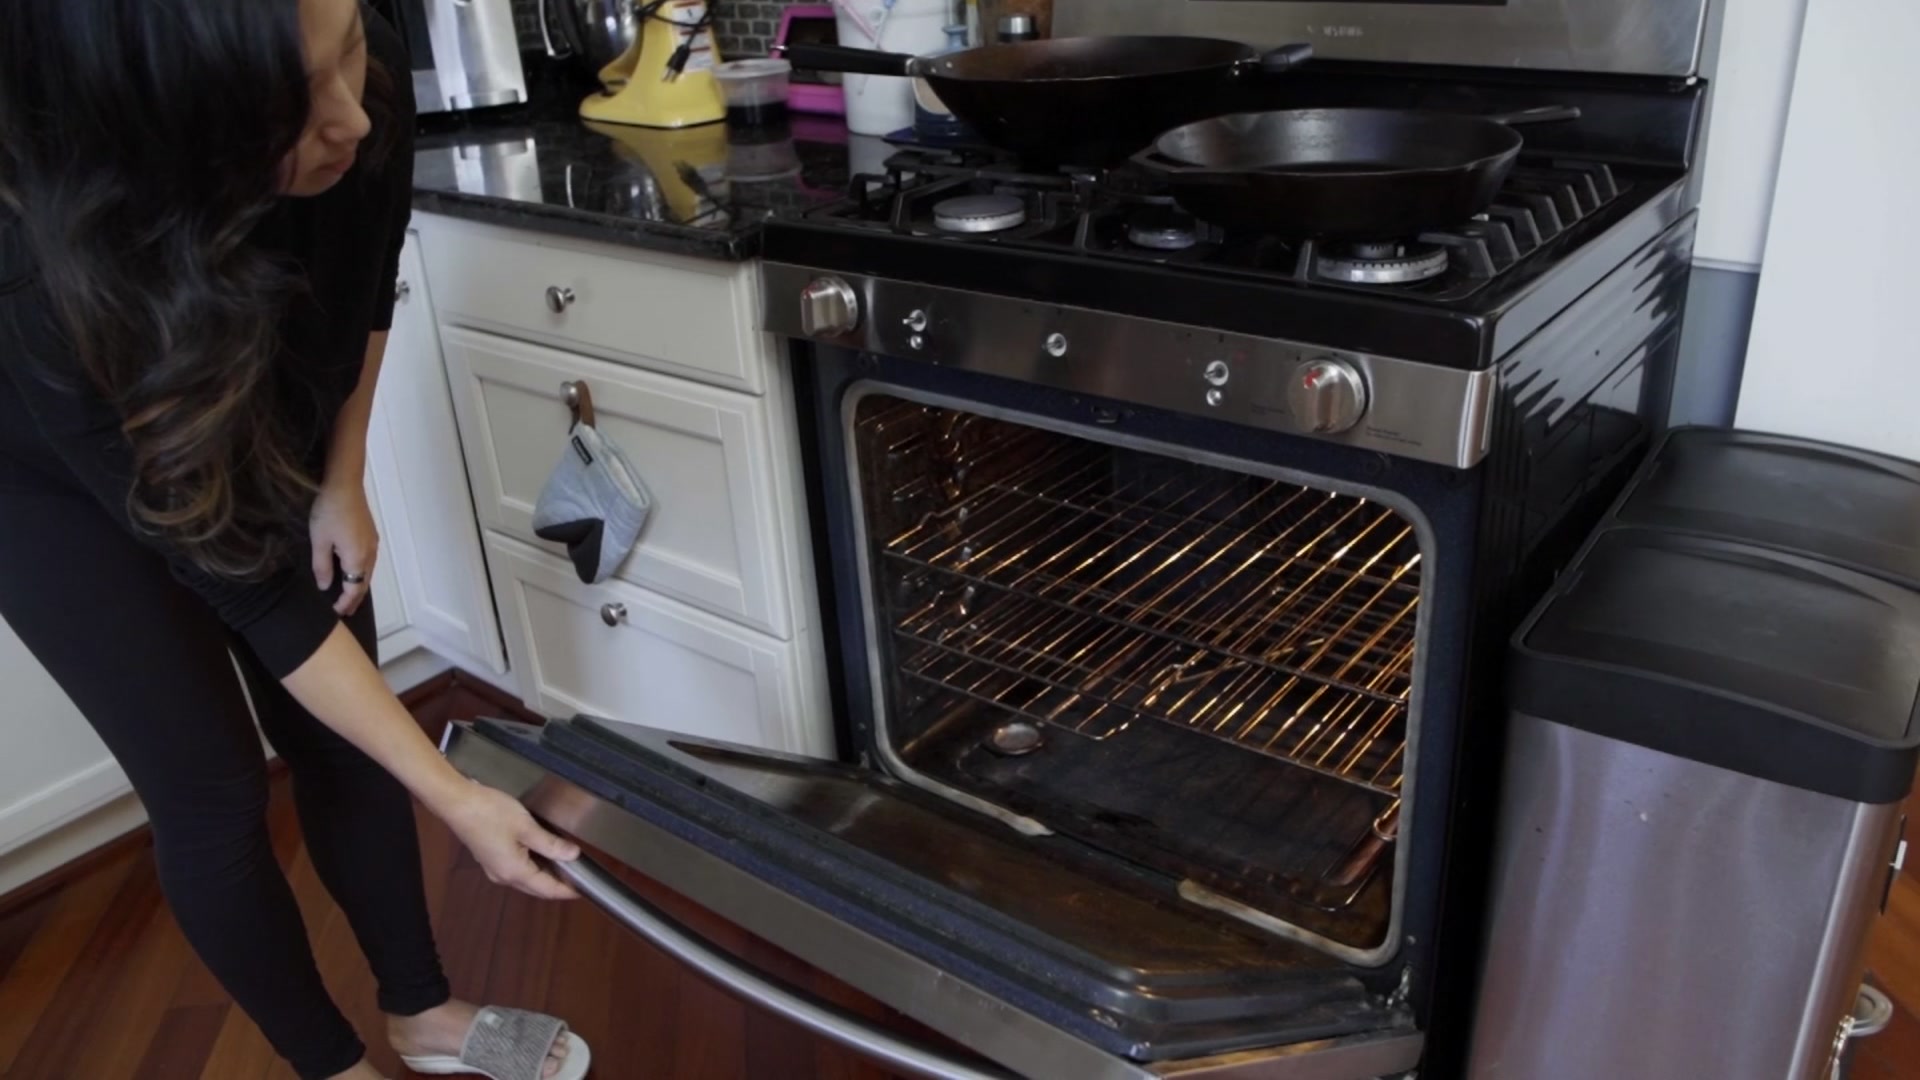 Using an oven to heat a house - here's why it's a bad idea. 